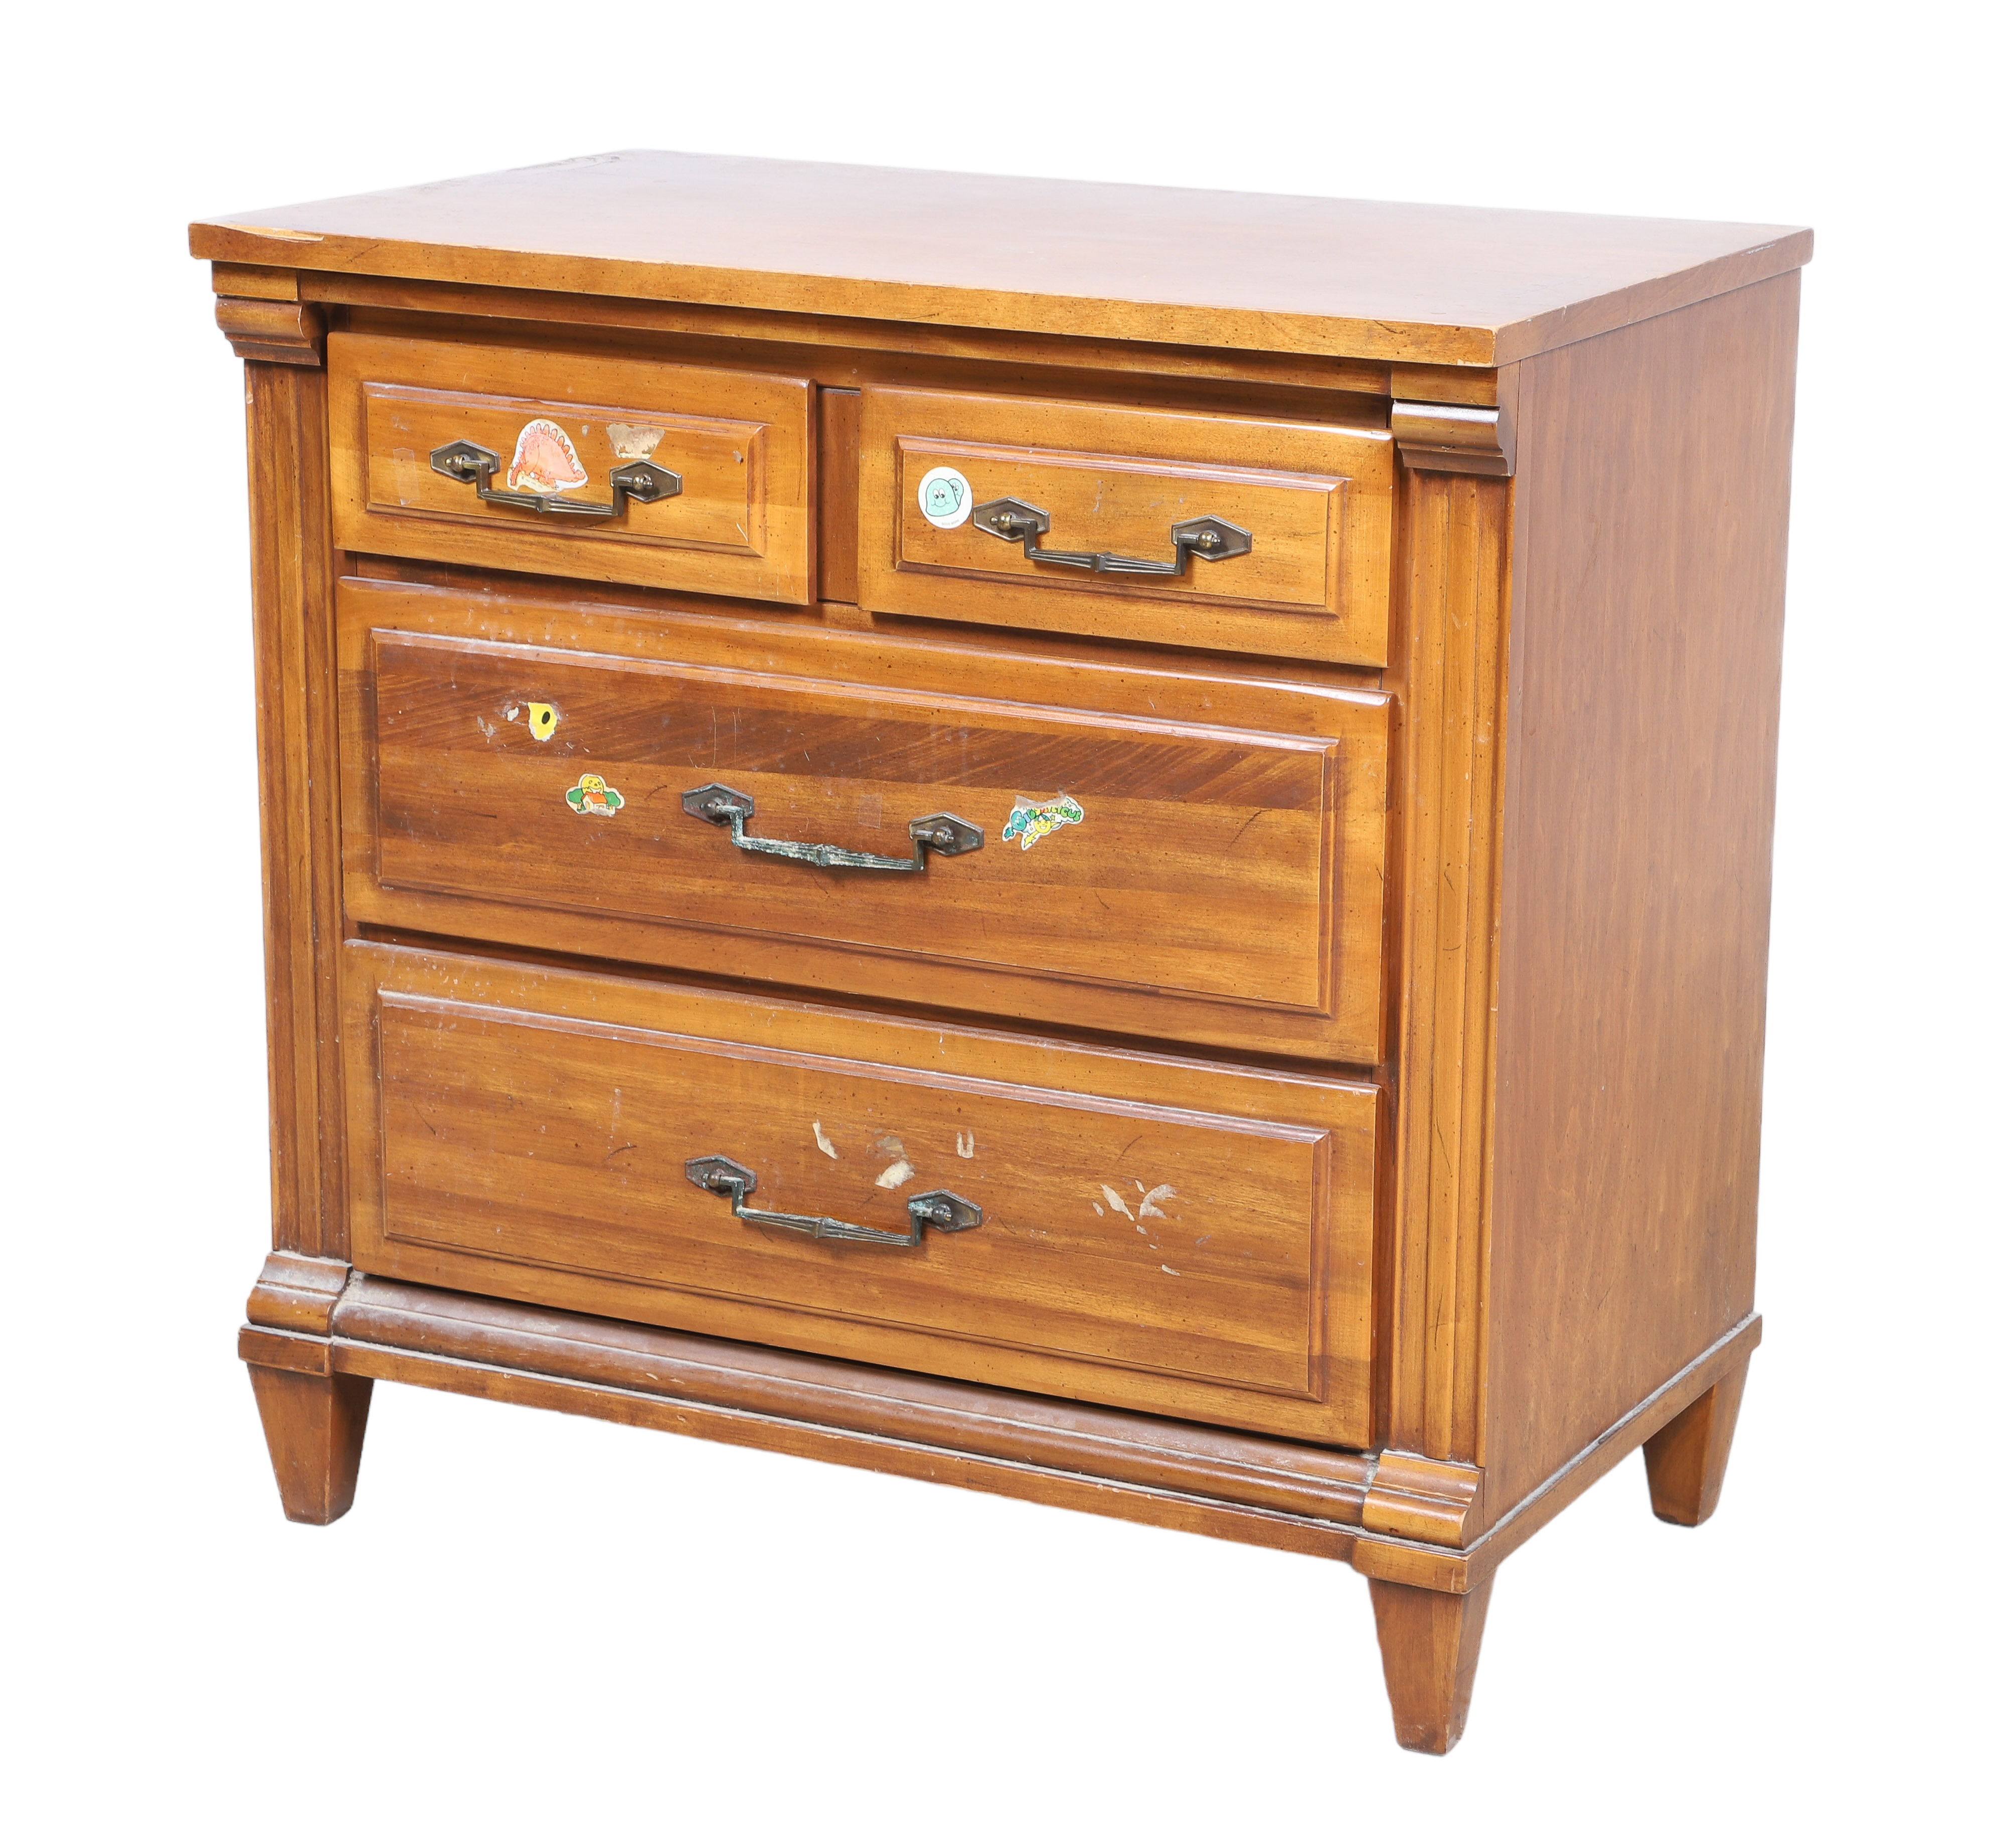 Mahogany chest of drawers, two